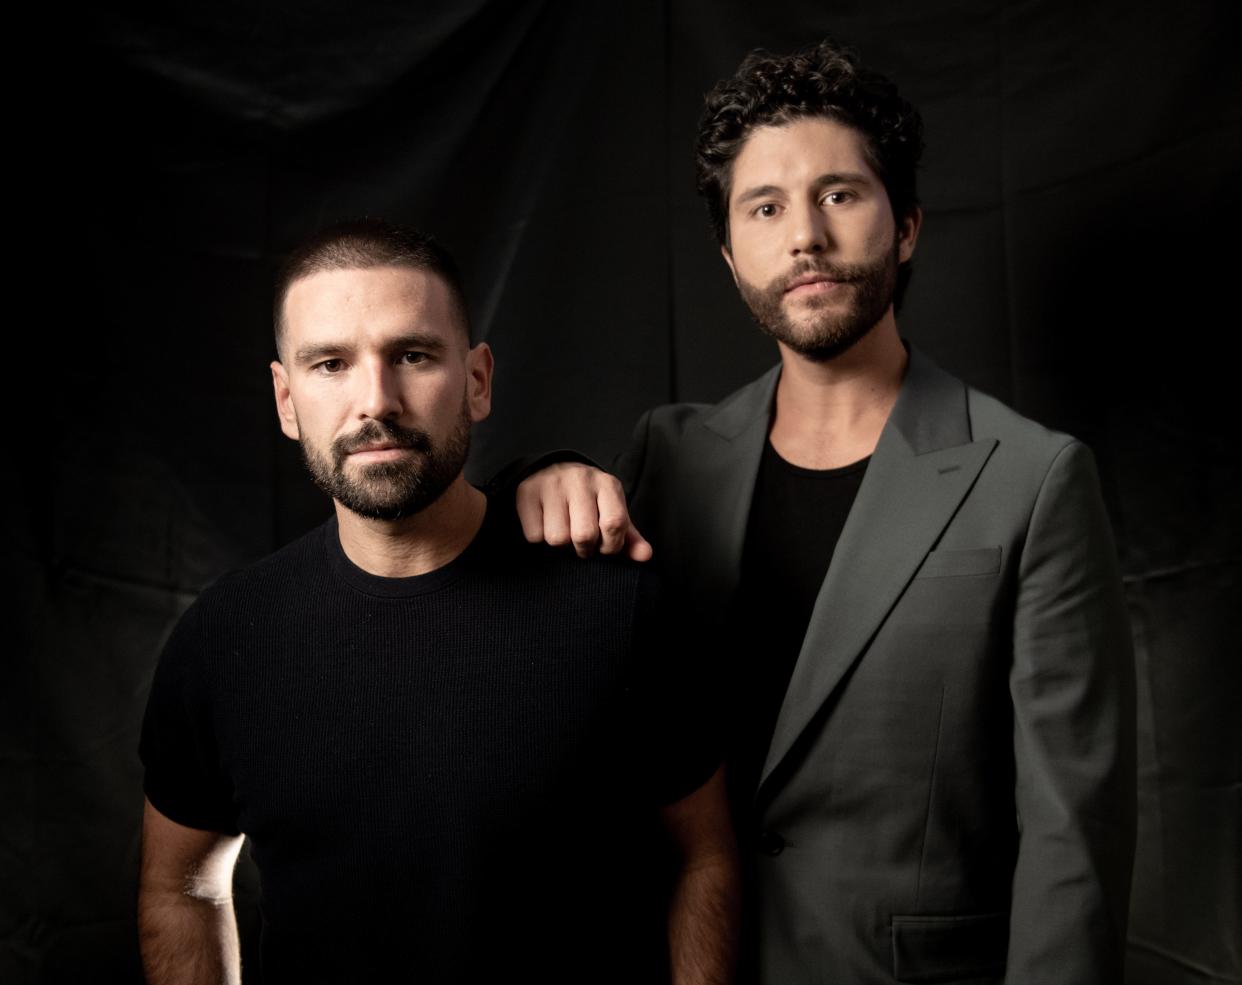 Country duo Dan + Shay will play Thompson Boling Arena at Food City Center in March while on the "Heartbreak on the Map" tour. Dan + Shay released their fifth album in 2023.